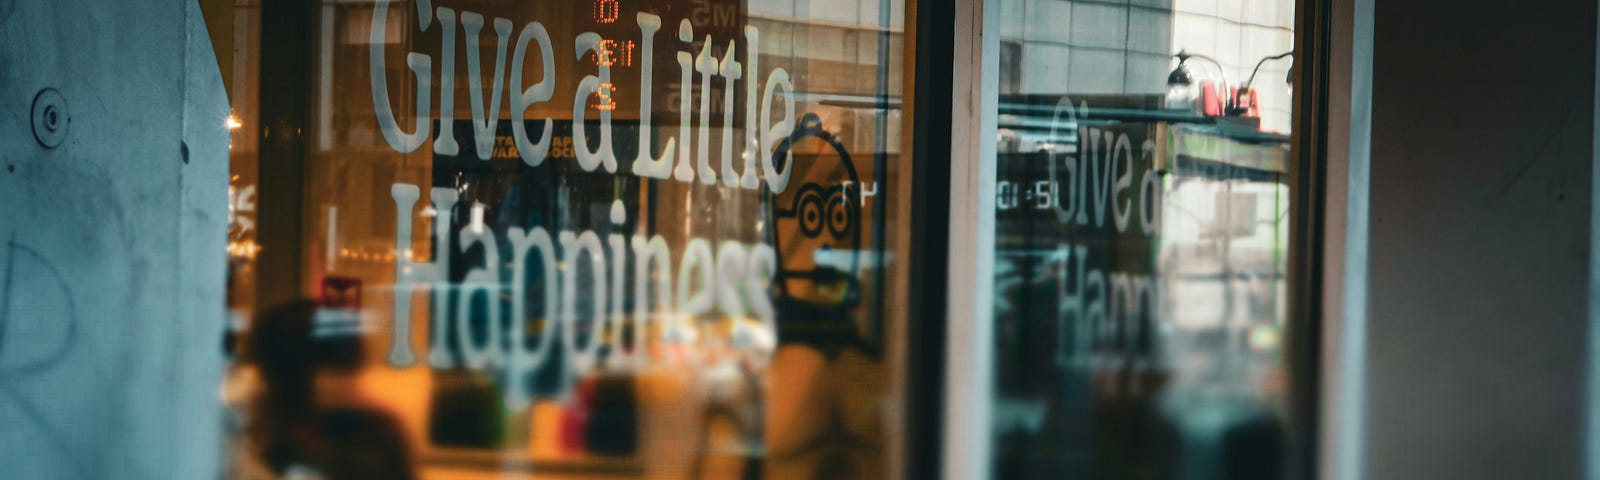 A storefront with the words “Give a Little Happiness” on the window